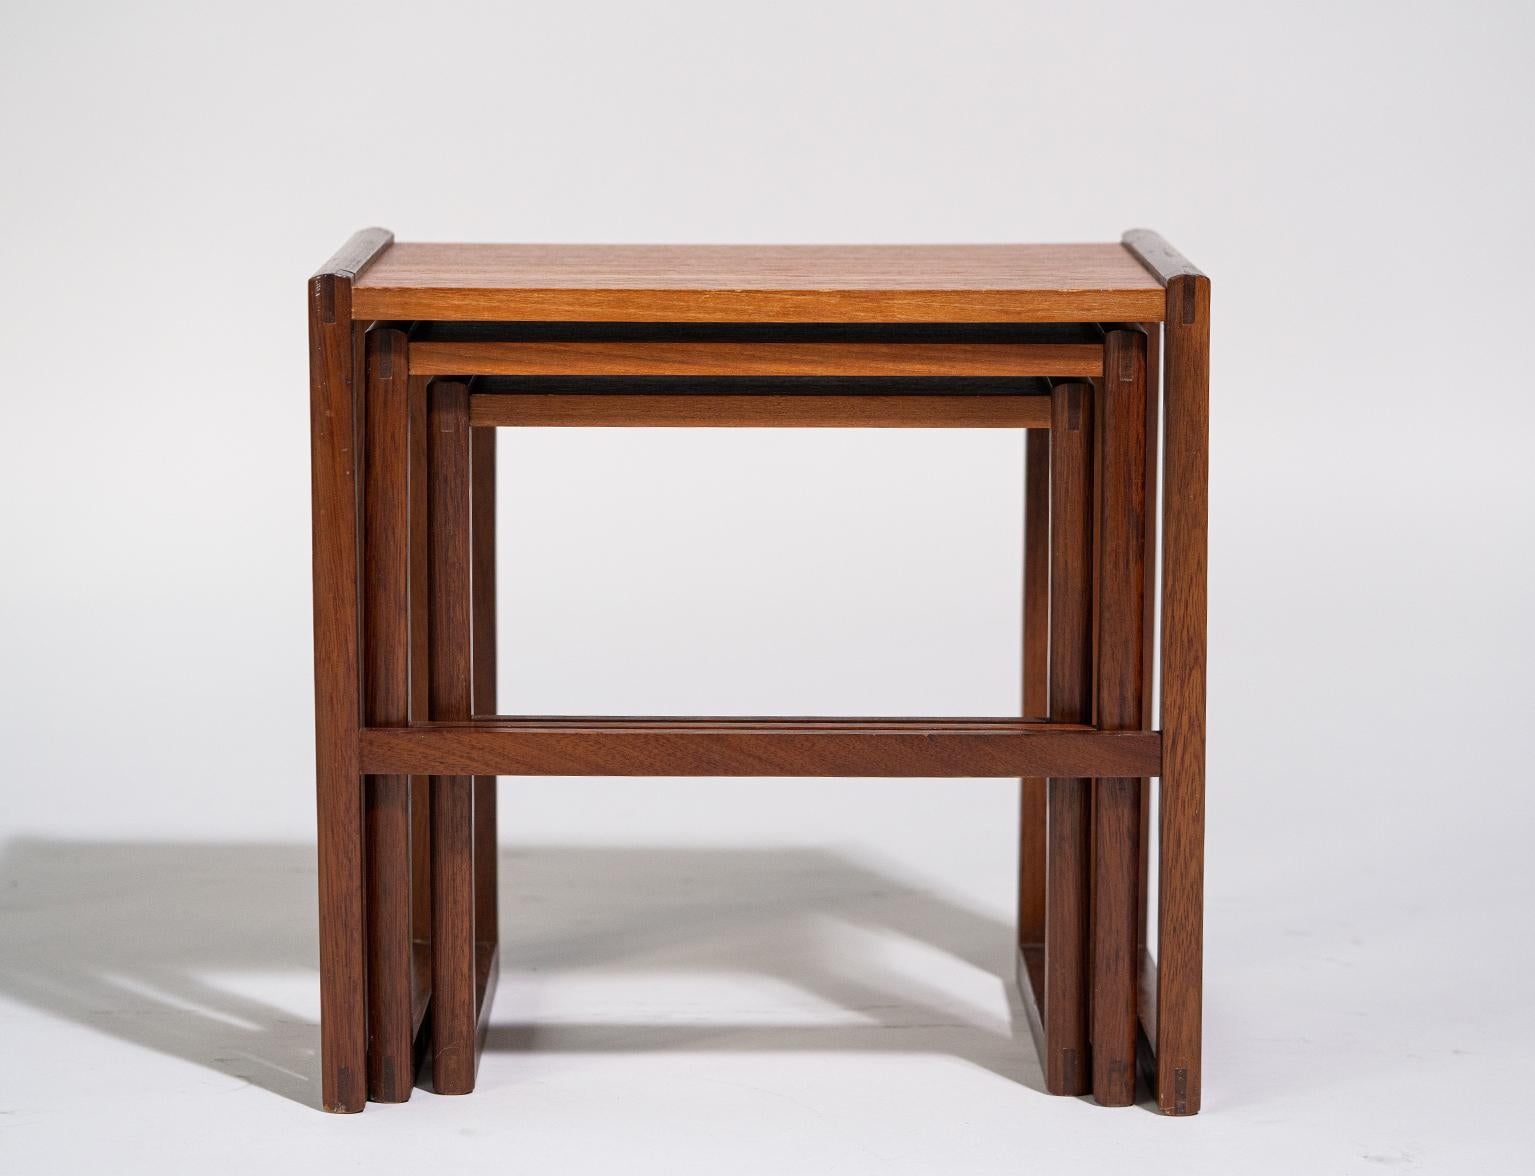 20th Century Teak and Mahogany Dream; Nest of Three Tables from 1960s, Sweden For Sale